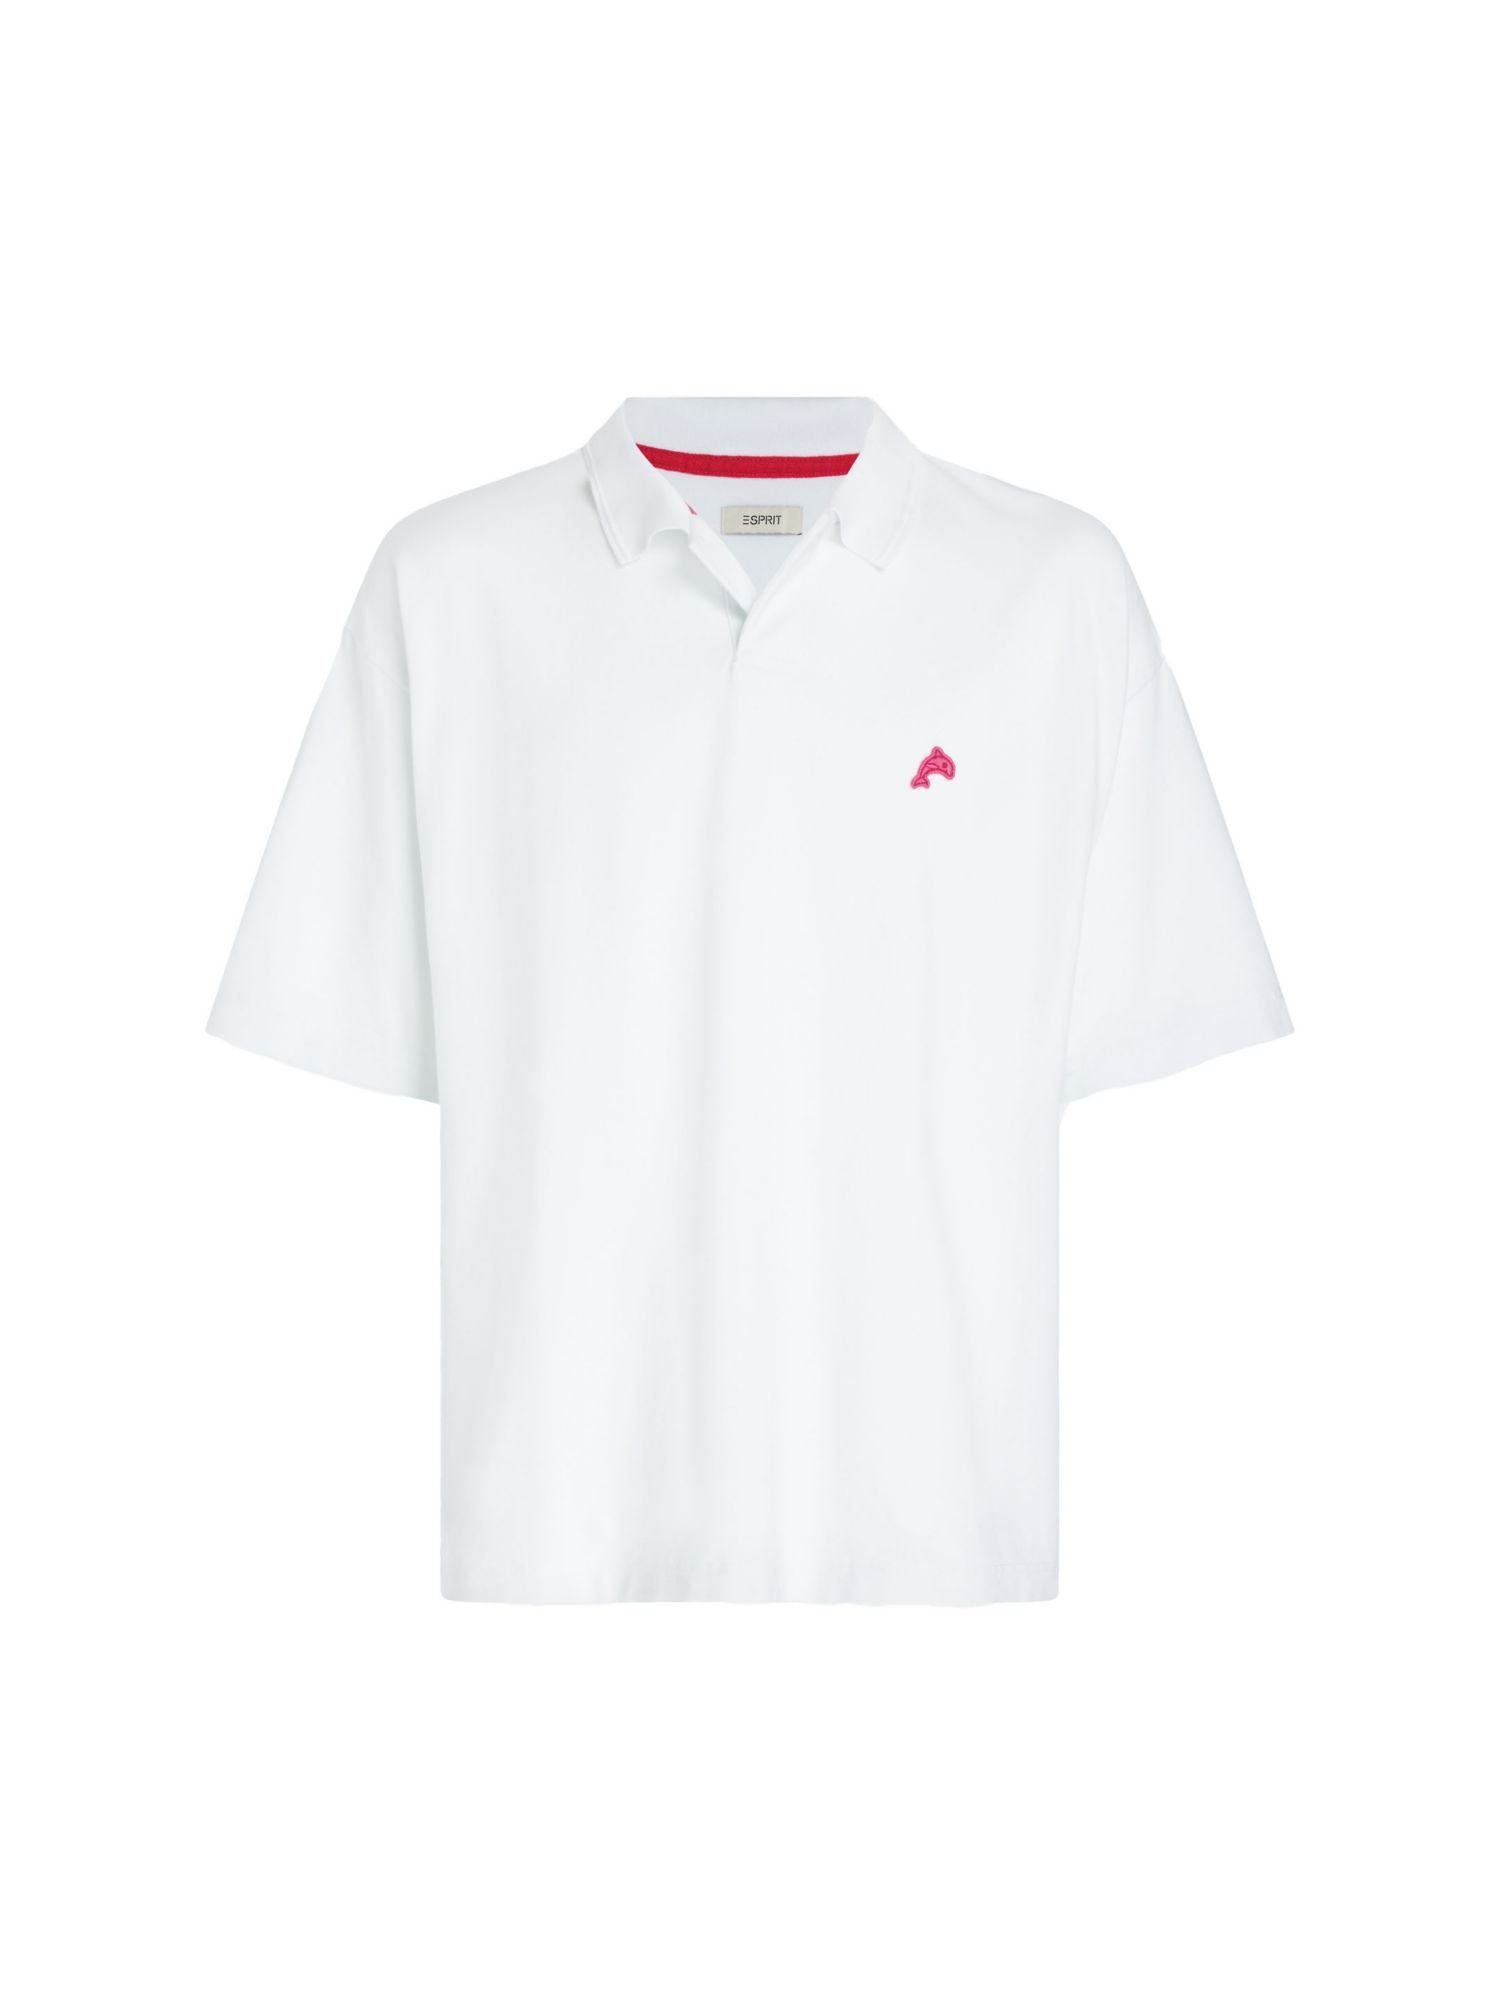 Dolphin-Badge Esprit Poloshirt Poloshirt WHITE mit Fit Relaxed